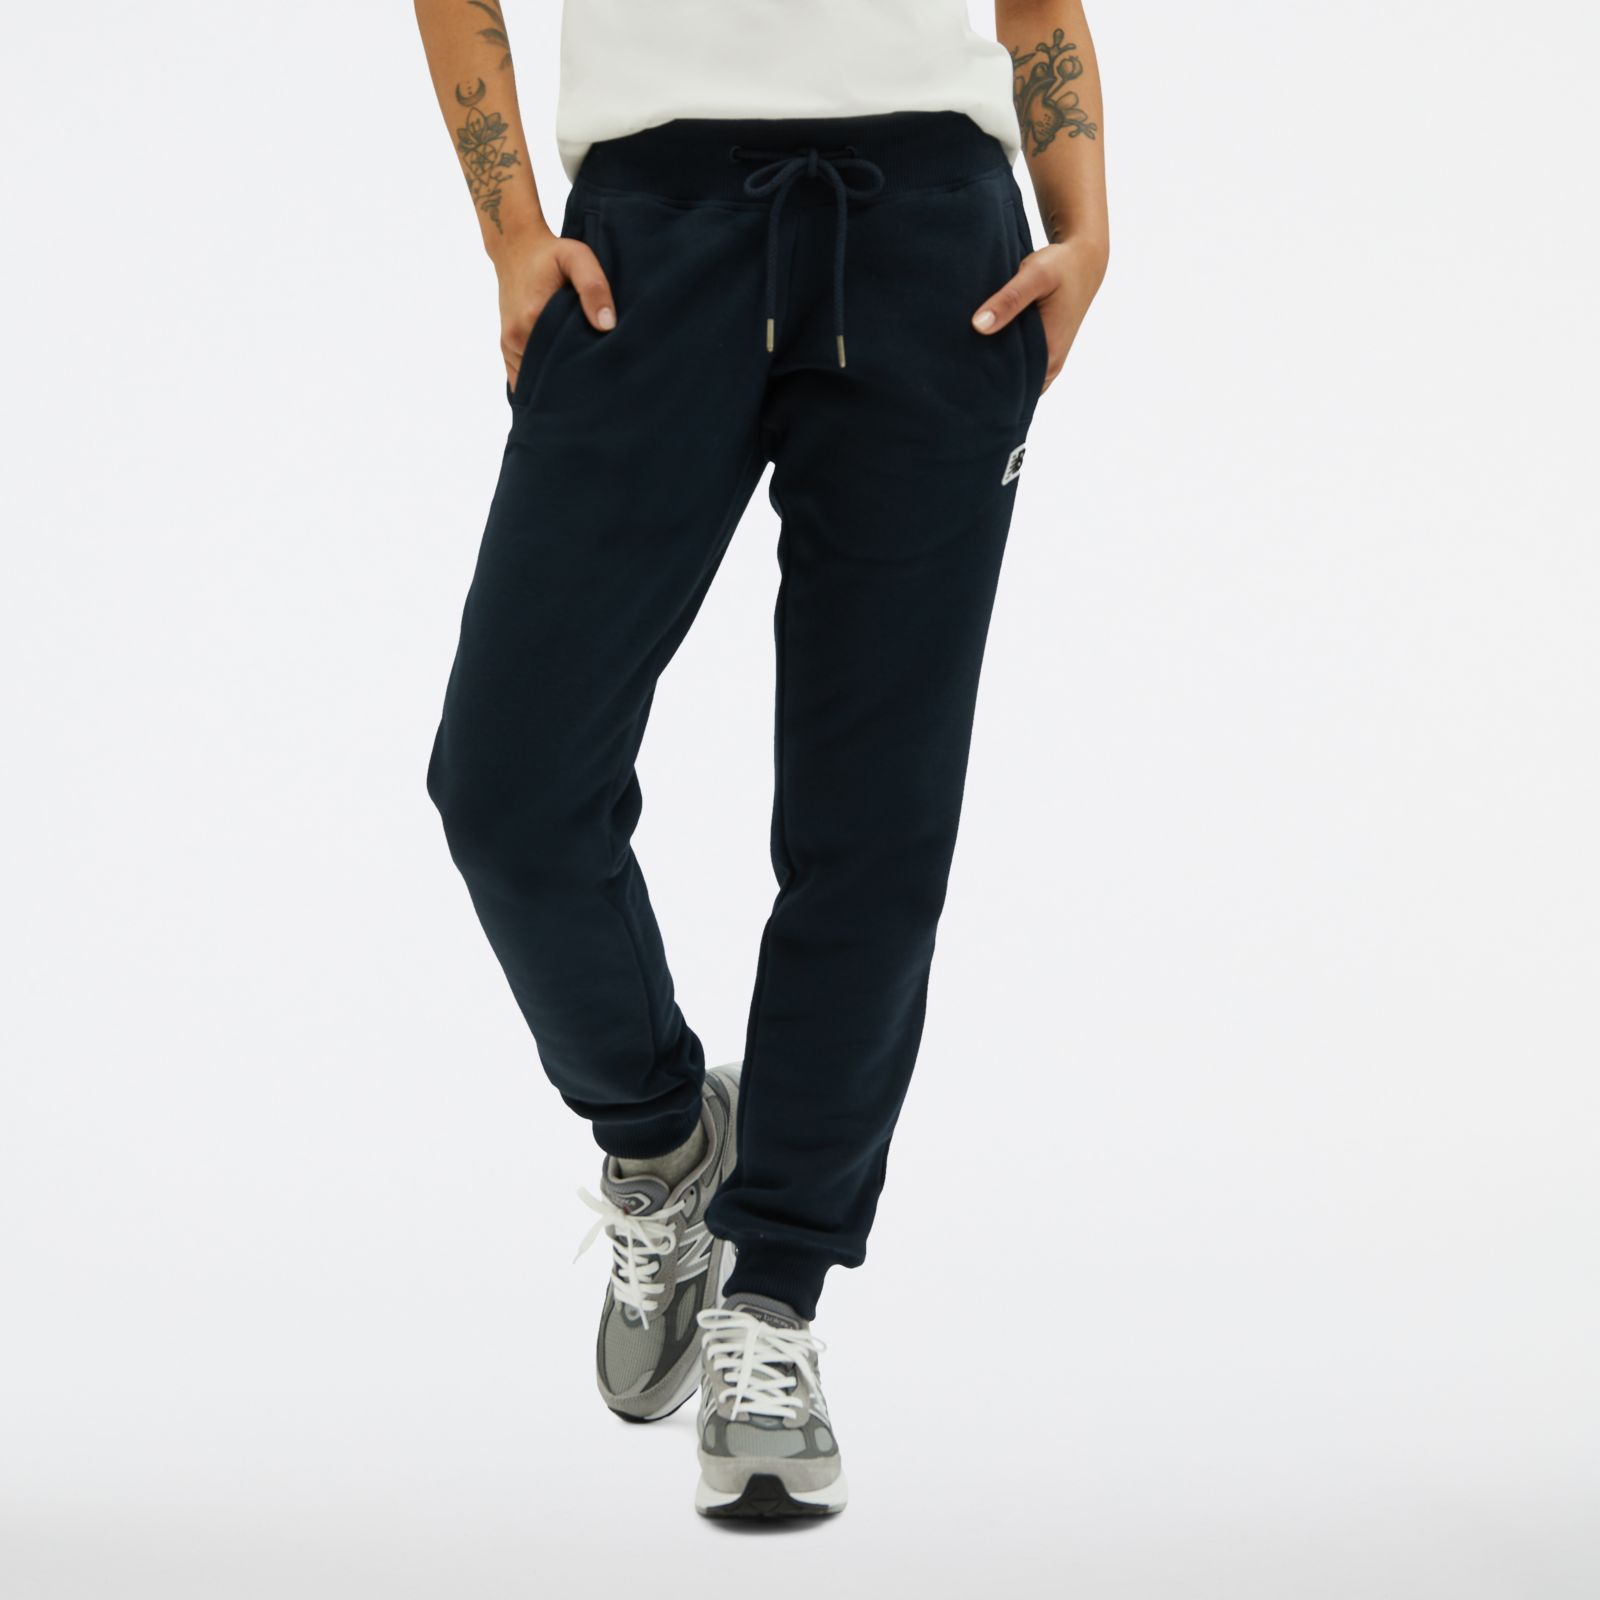 New Balance small logo joggers in black - ShopStyle Activewear